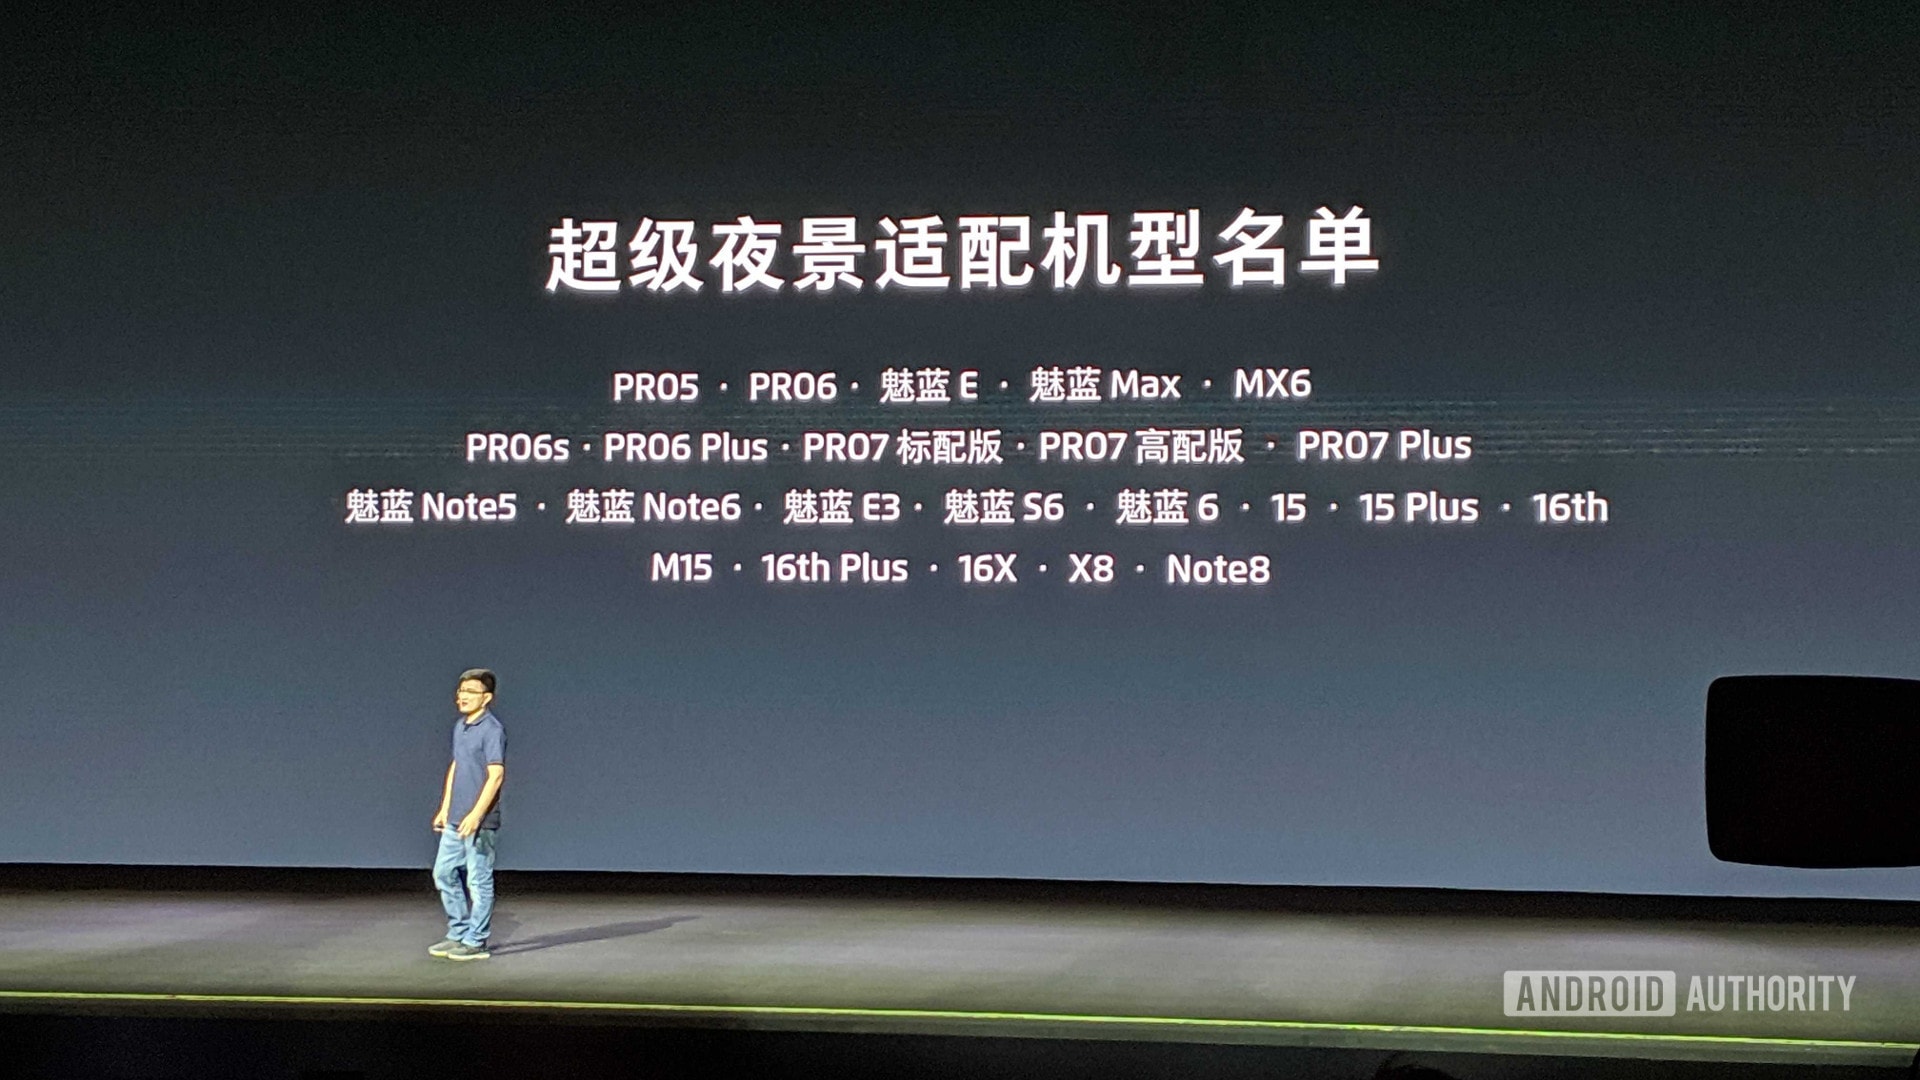 A list of Meizu phones that will receive night mode.